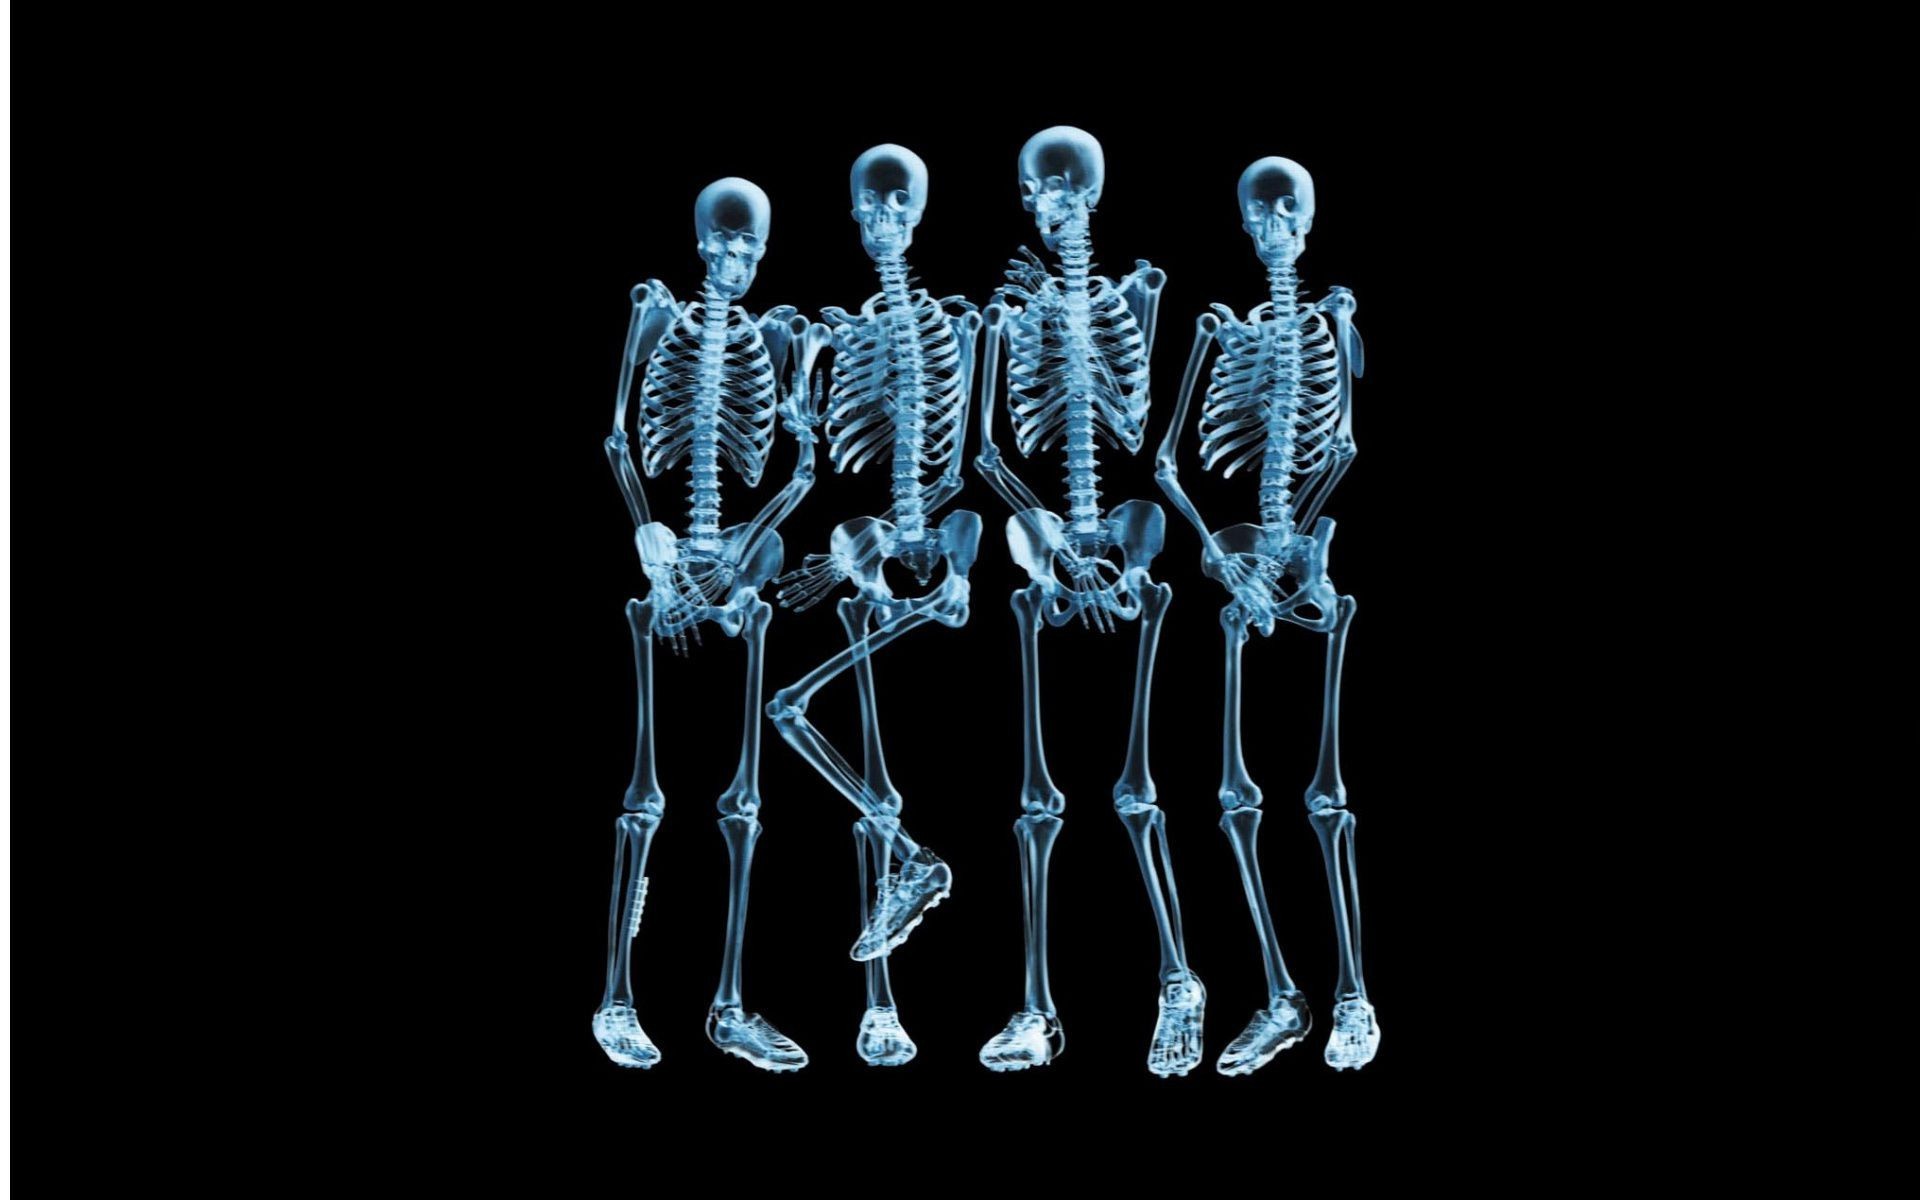 1920x1200 X-ray soccer black background humor creative wall pose. Desktop wallpapers  for free.